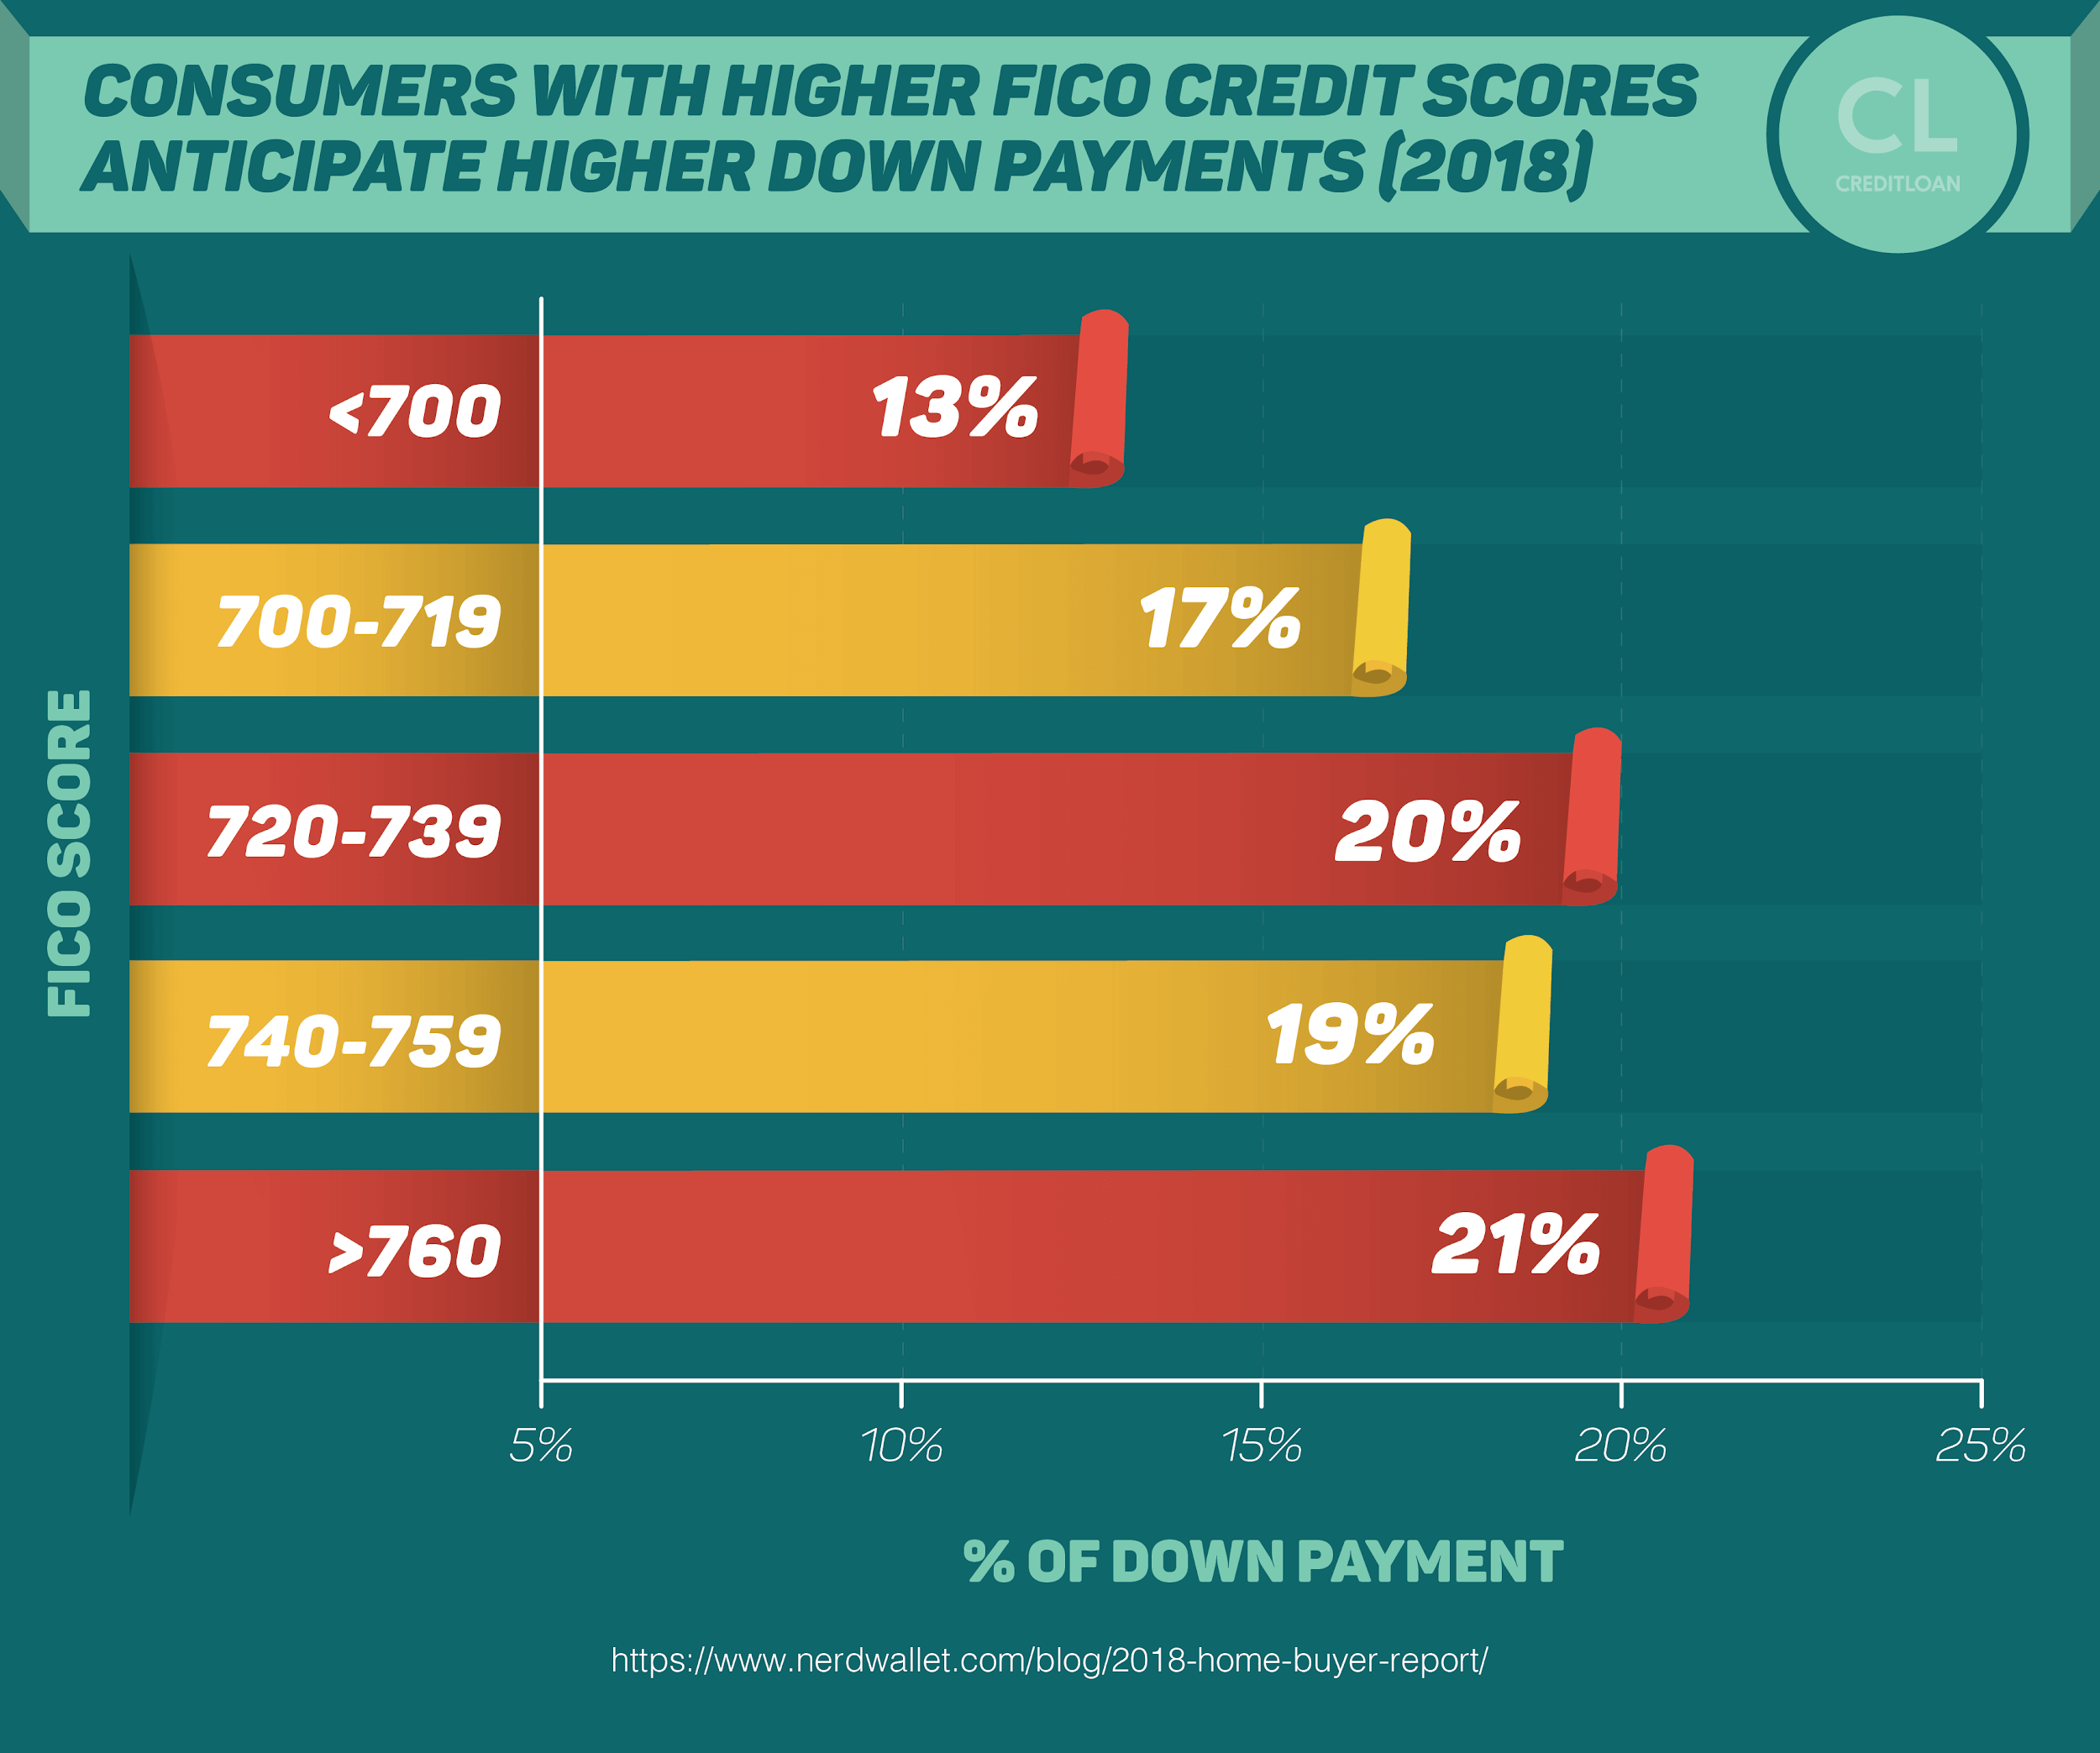 Home Buyer Report: Higher FICO Credit Scores Anticipate Higher Down Payments